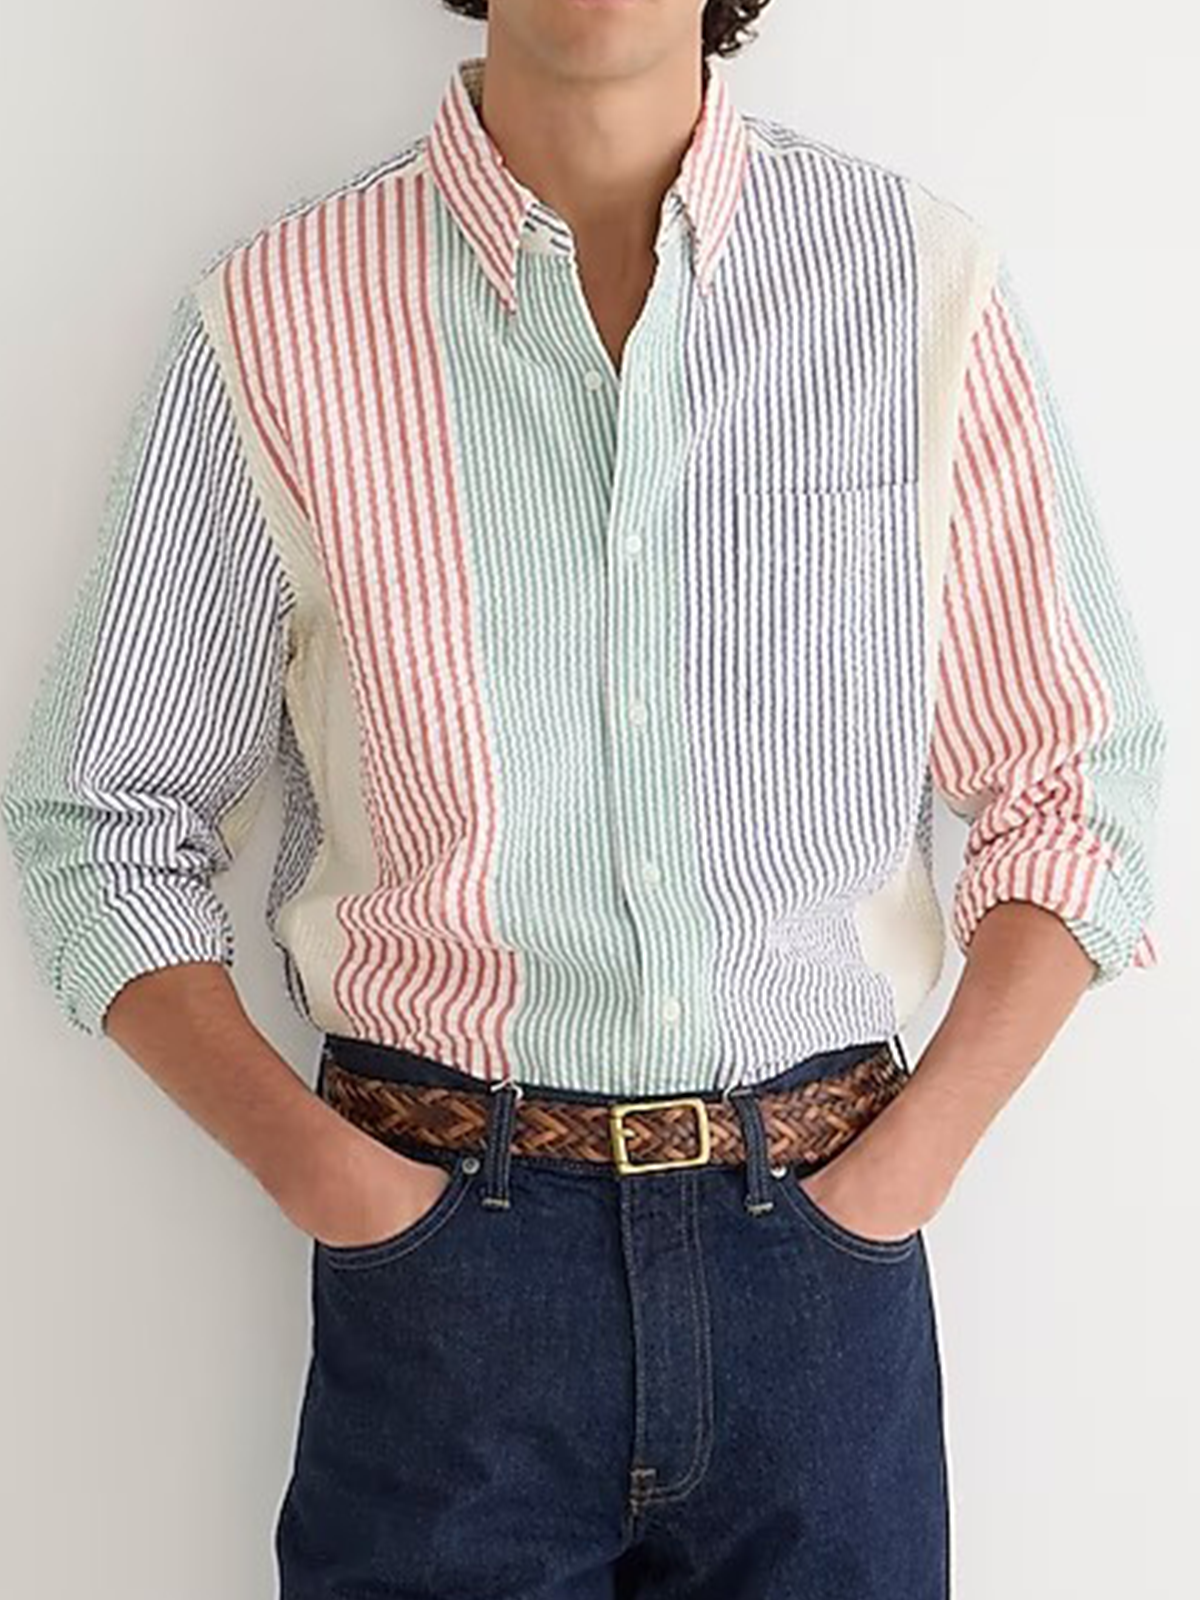 Hardaddy Contrast Stripes Chest Pocket Long Sleeve Casual Shirt